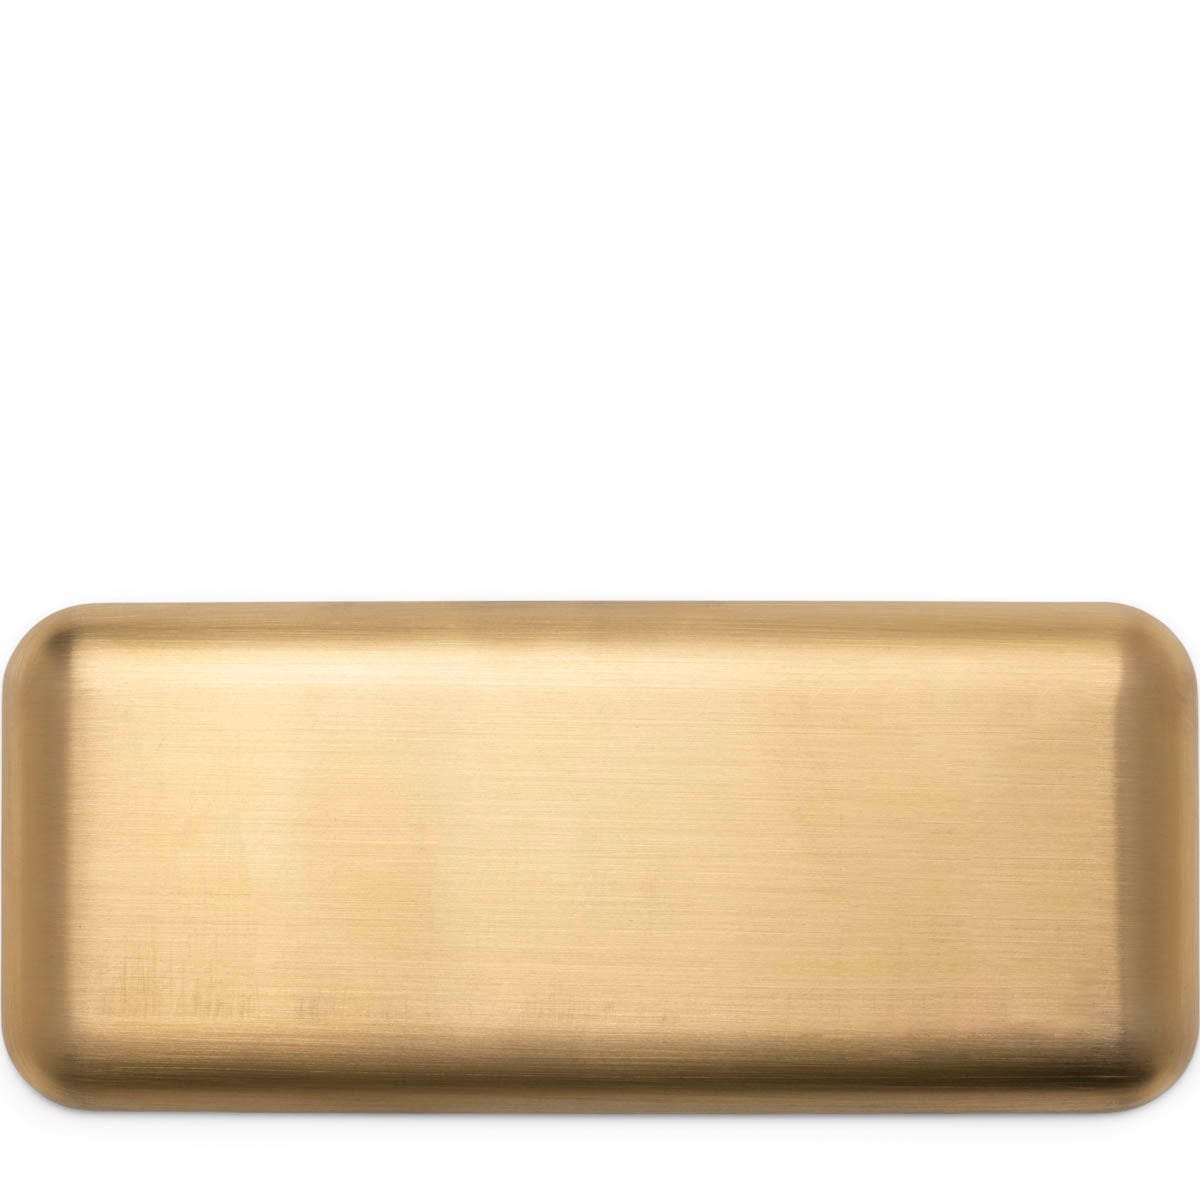 MISTER GREEEN Odds & Ends BRASS / O/S LOGO ROLLING TRAY